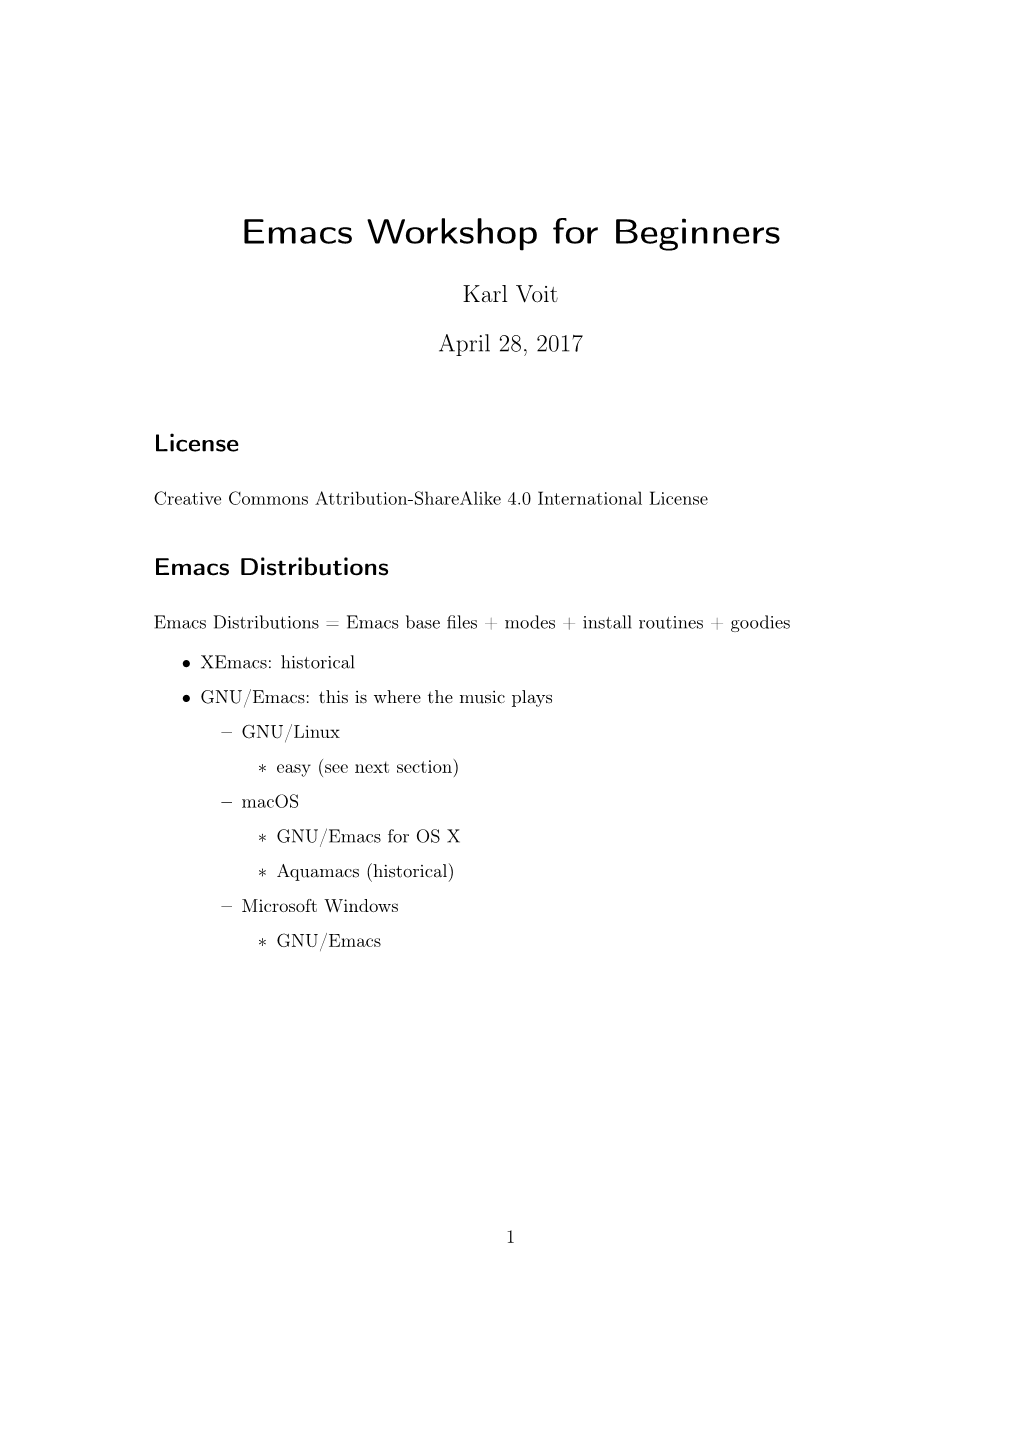 Emacs Workshop for Beginners